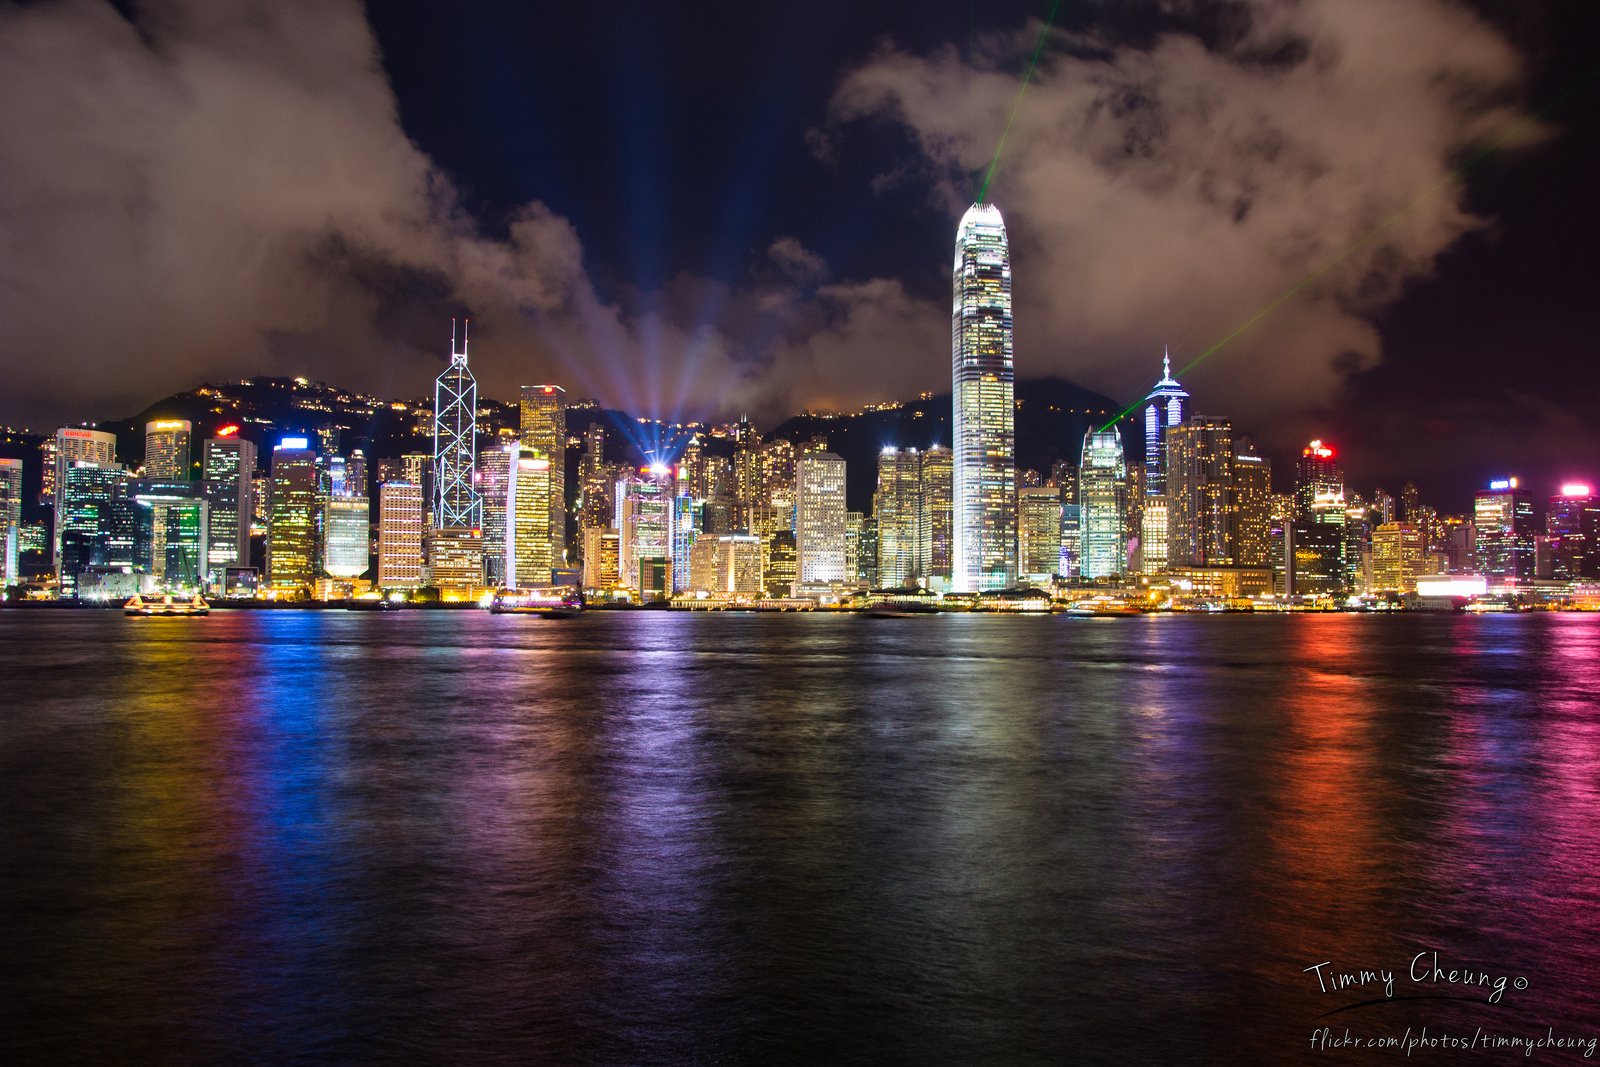 architecture, Bridge, Buildings, Cities, Cityscape, Contrast, Empire, Lights, Night, Panorama, Place, Rivers, Scenic, Shift, Skyline, Skyscrapers, View, Water, Window, World, China, Honkong Wallpaper